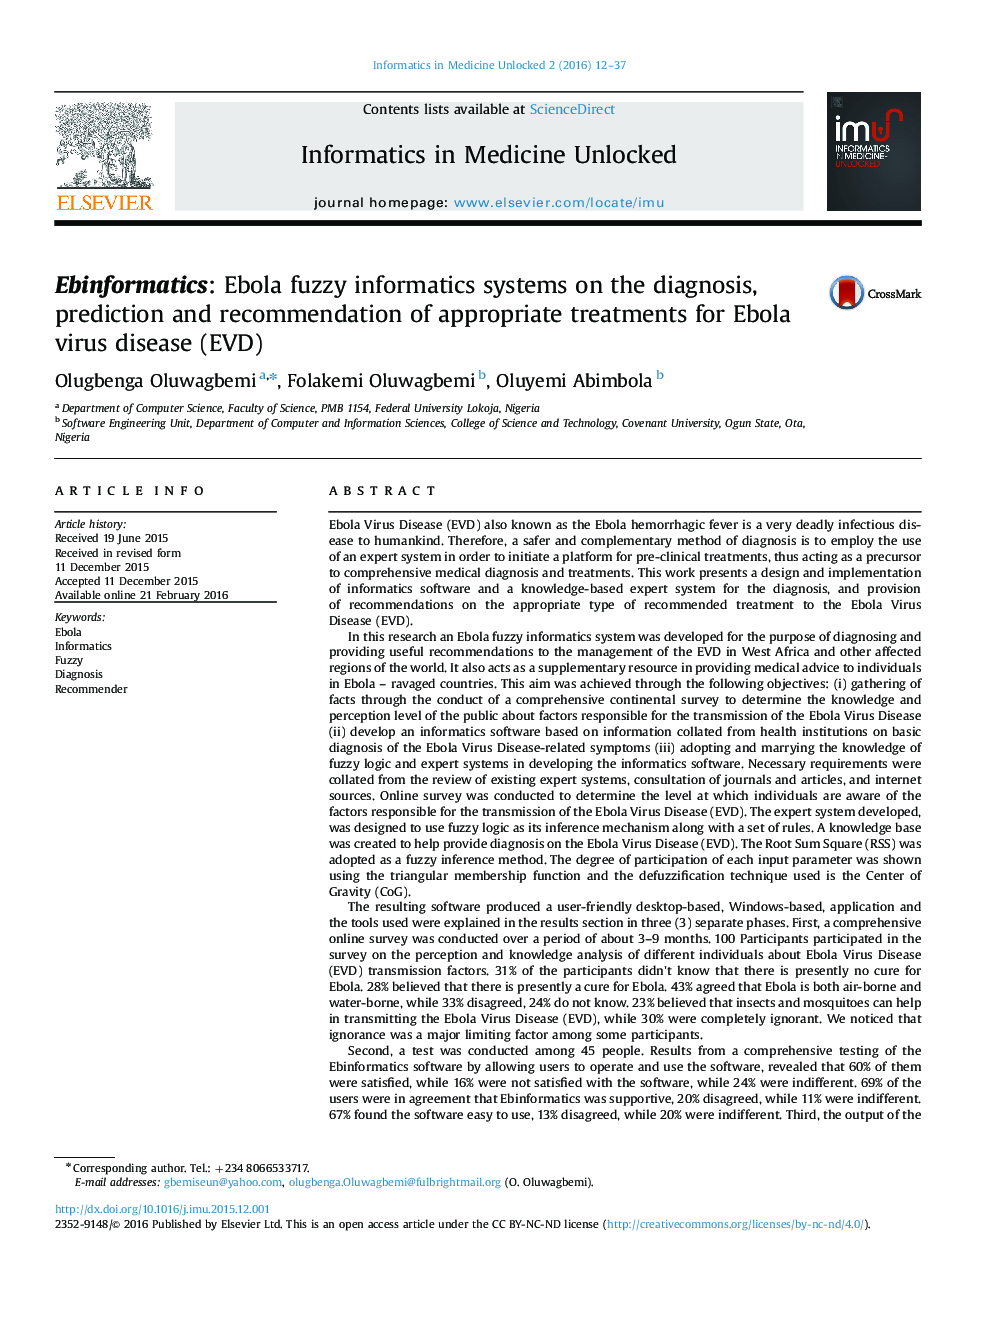 Ebinformatics: Ebola fuzzy informatics systems on the diagnosis, prediction and recommendation of appropriate treatments for Ebola virus disease (EVD)